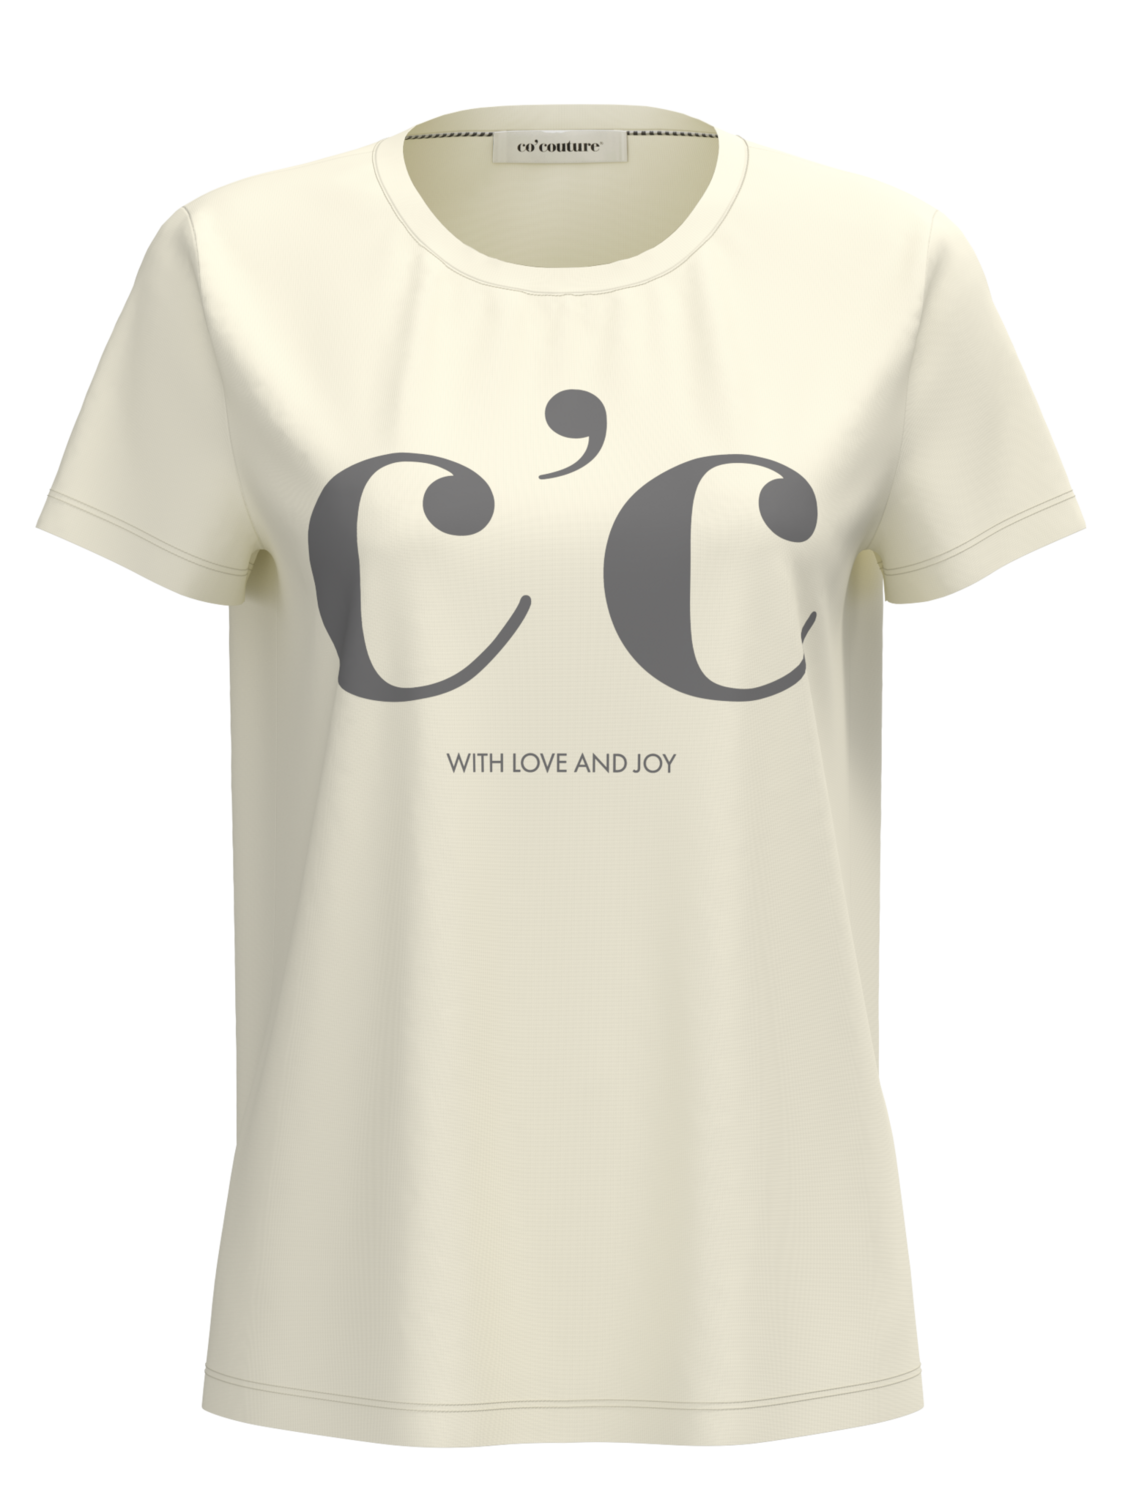 Co'Couture CleanCC Tee